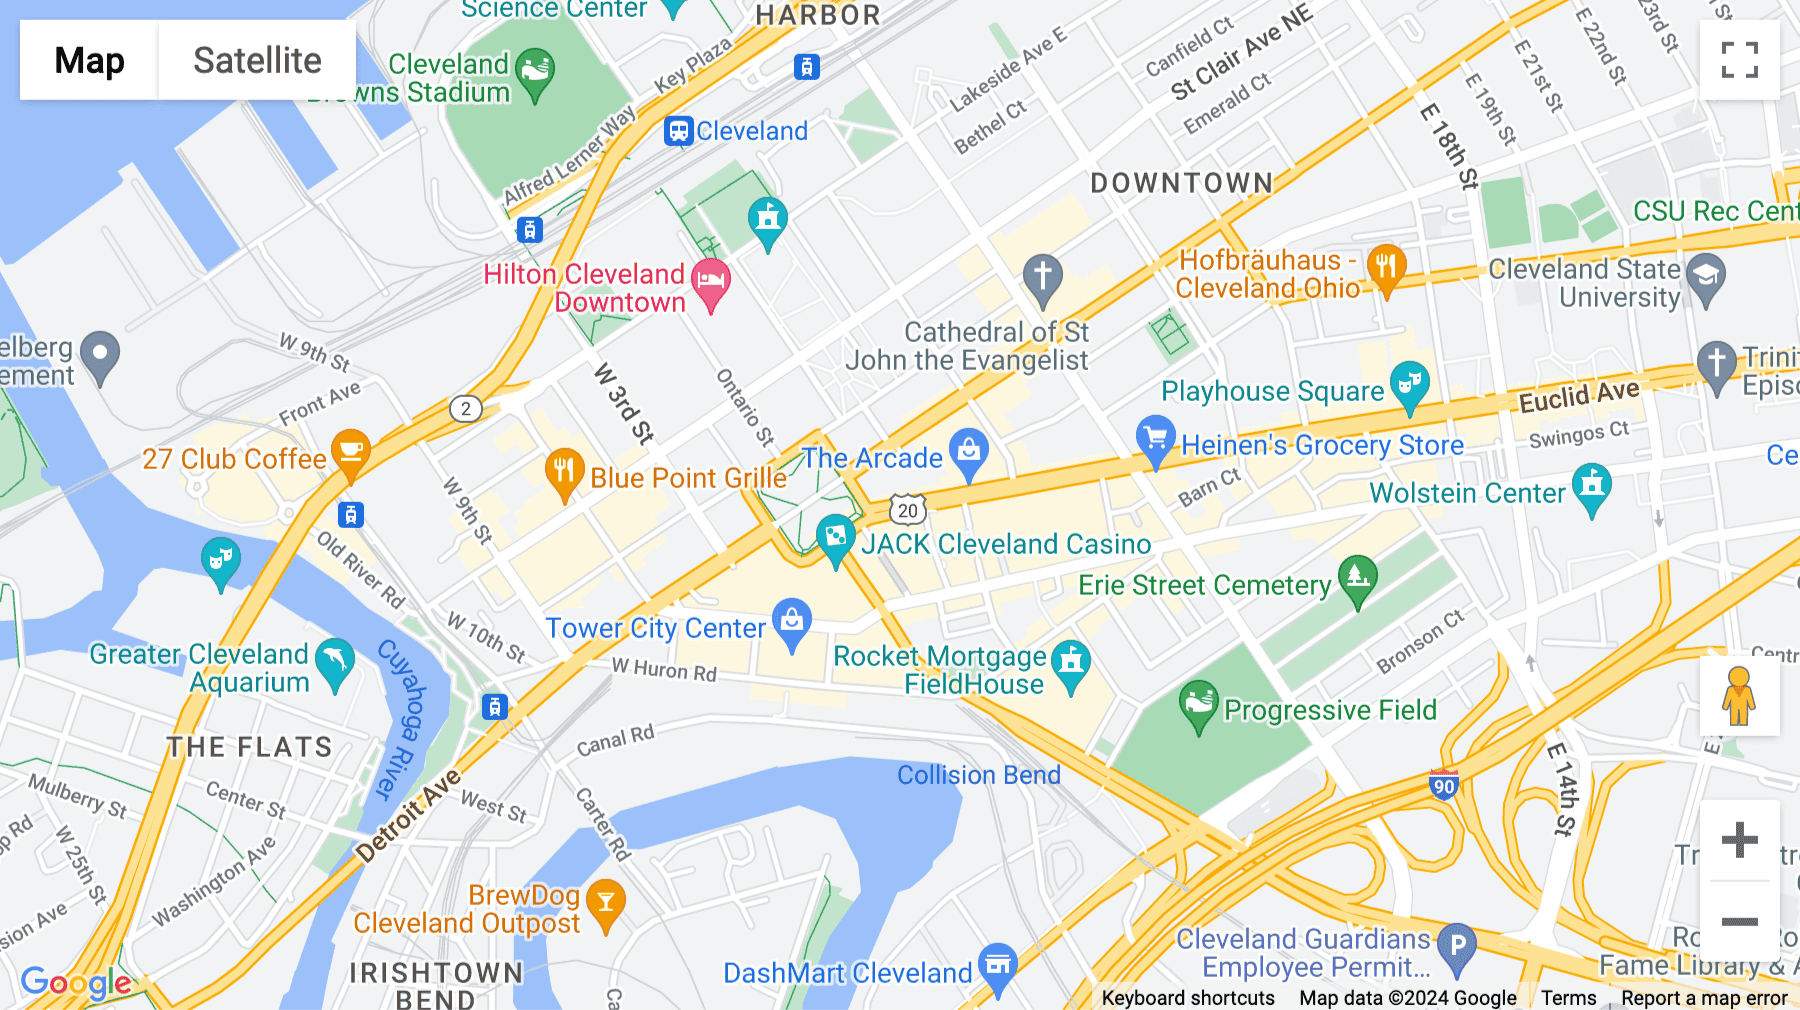 Click for interative map of 850 Euclid Avenue, The City Club Building, Cleveland